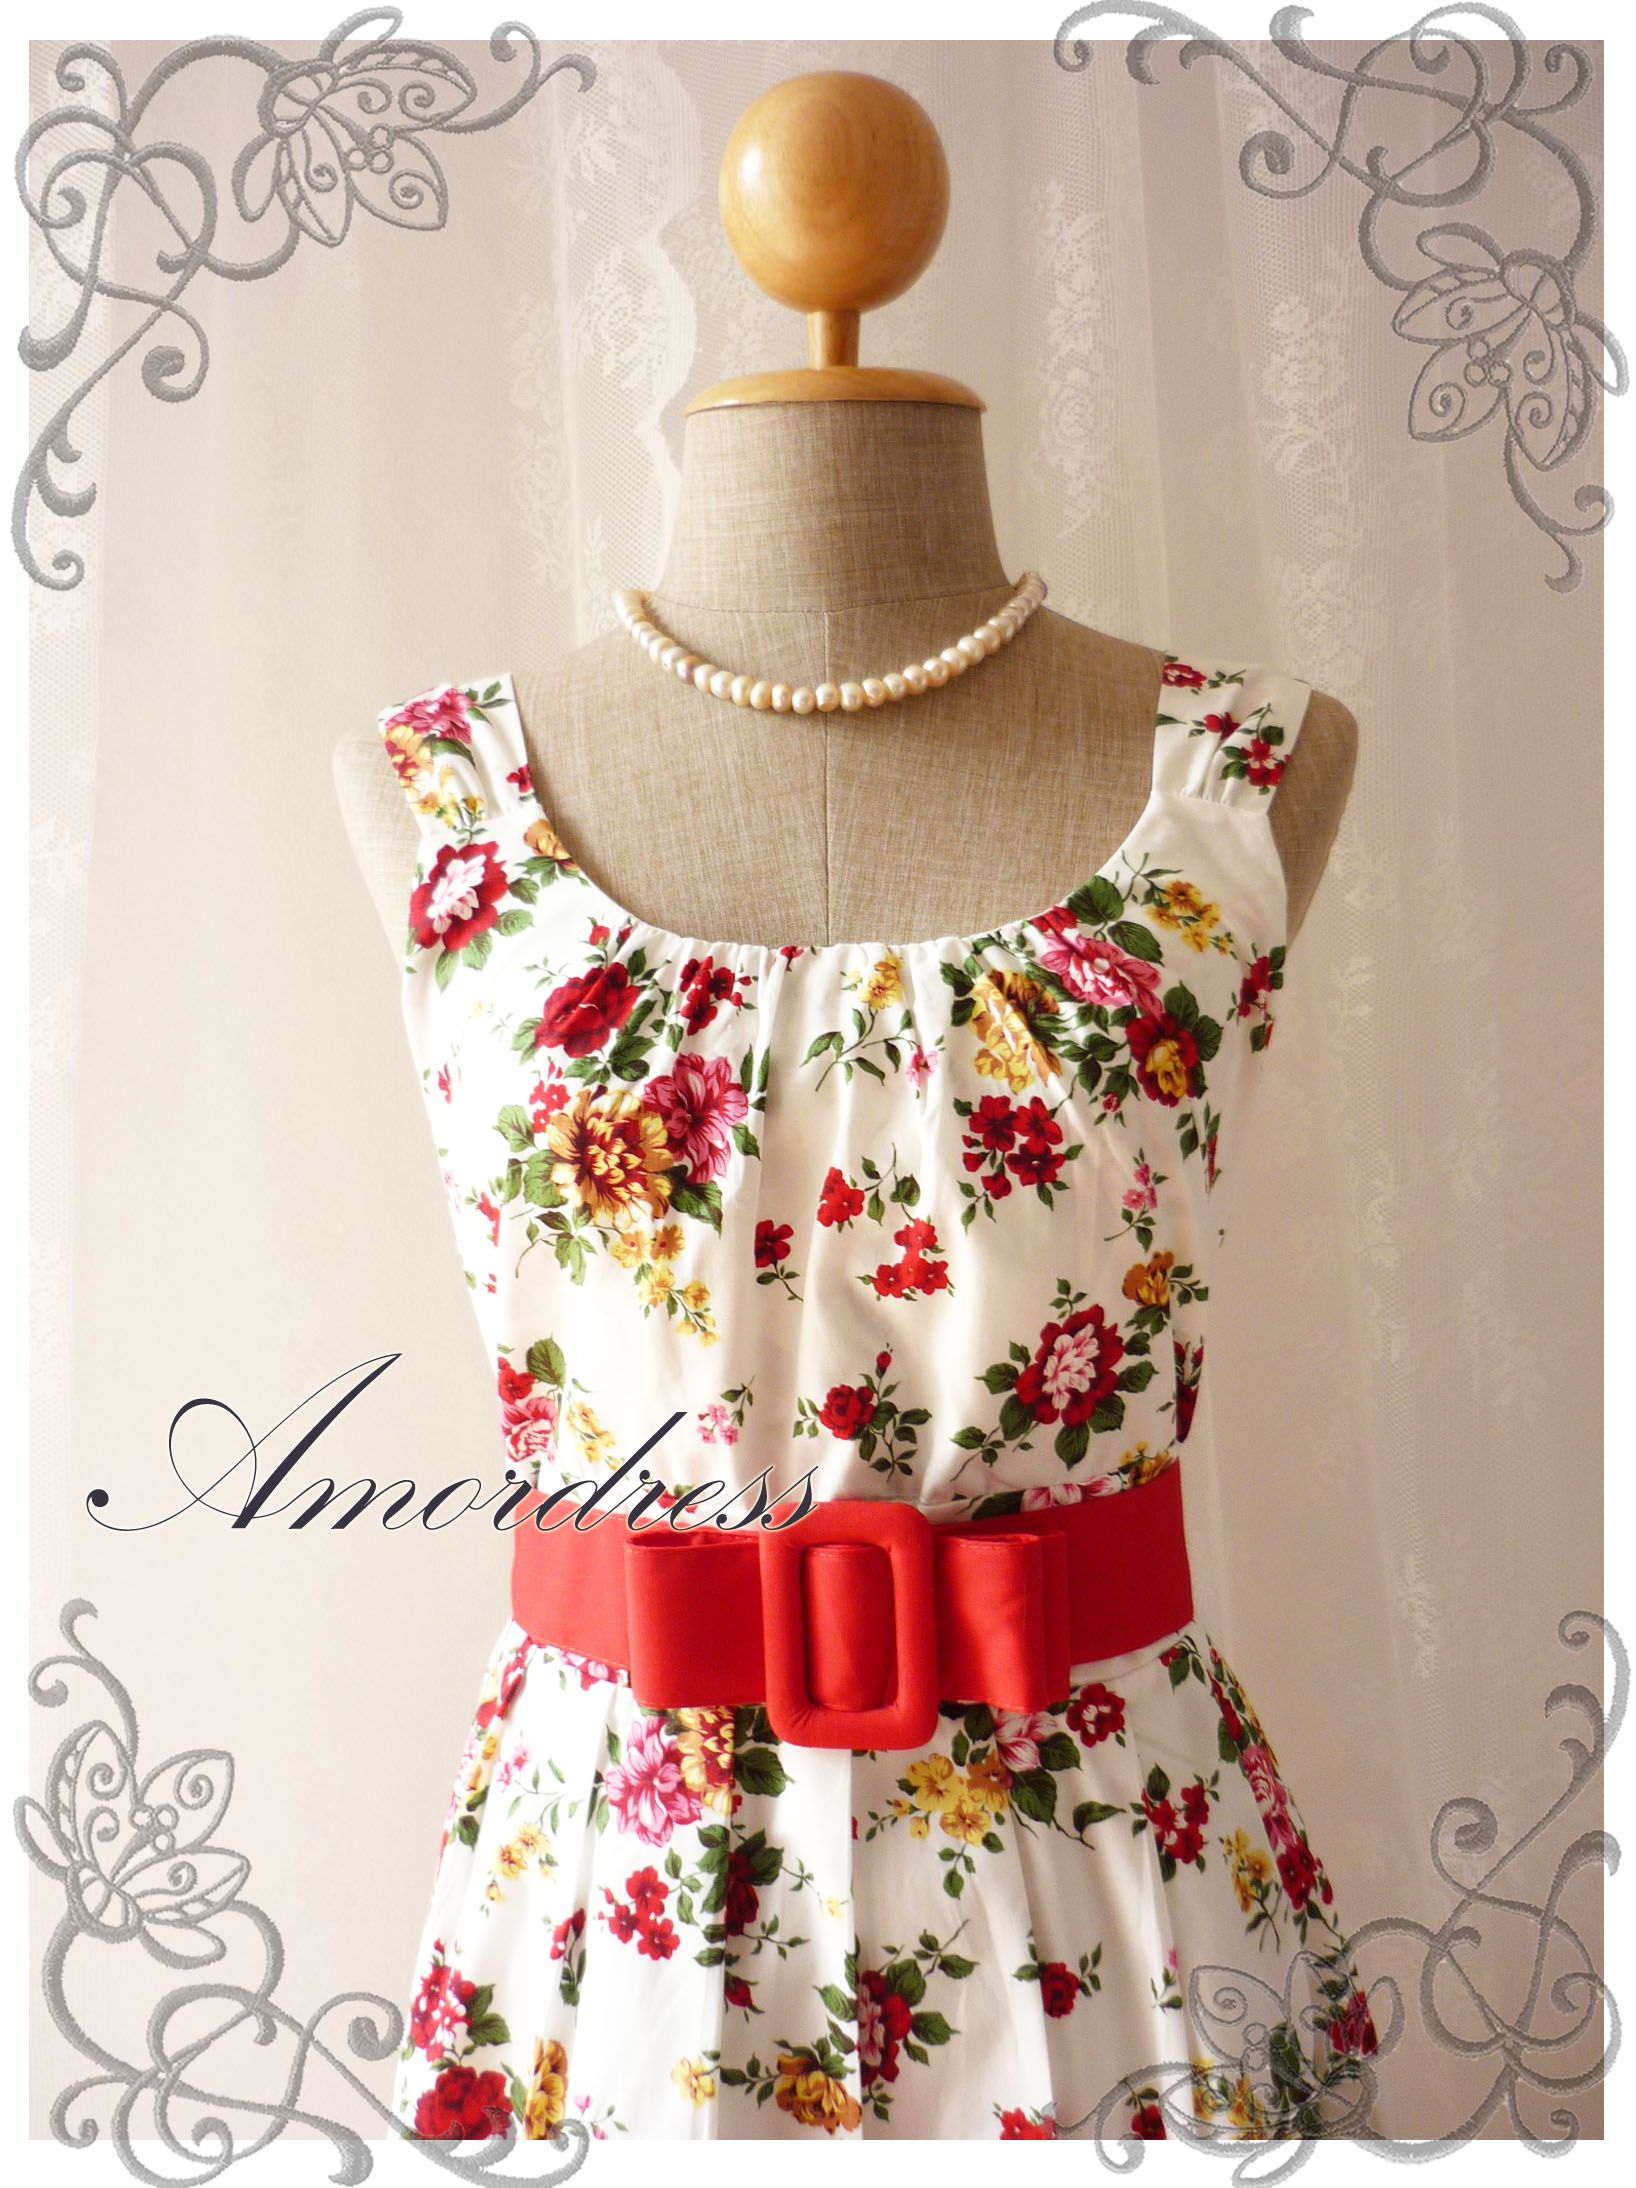 red and white flower dress